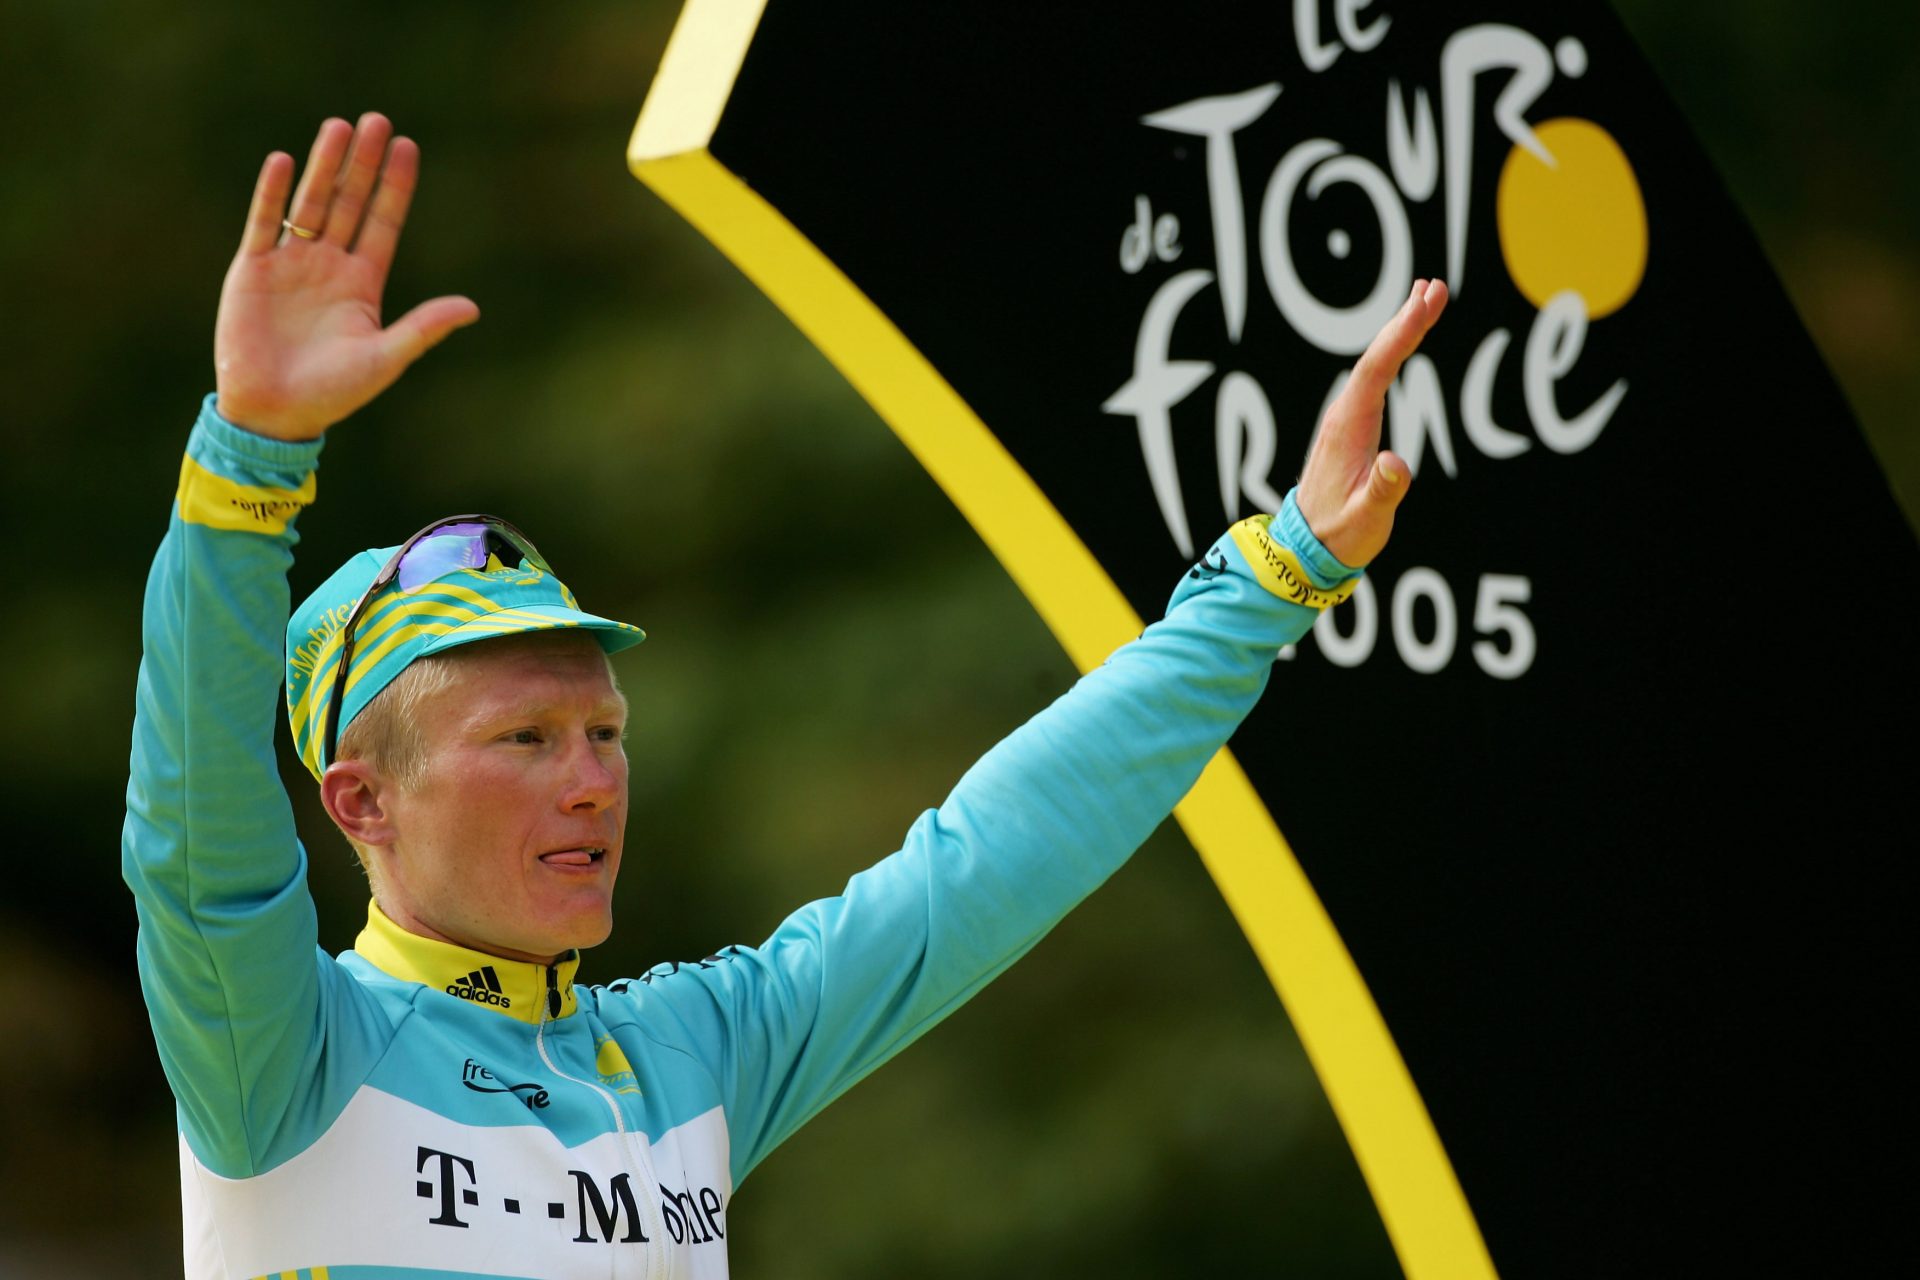 Alexander Vinokourov, the biggest cheater in the history of cycling?